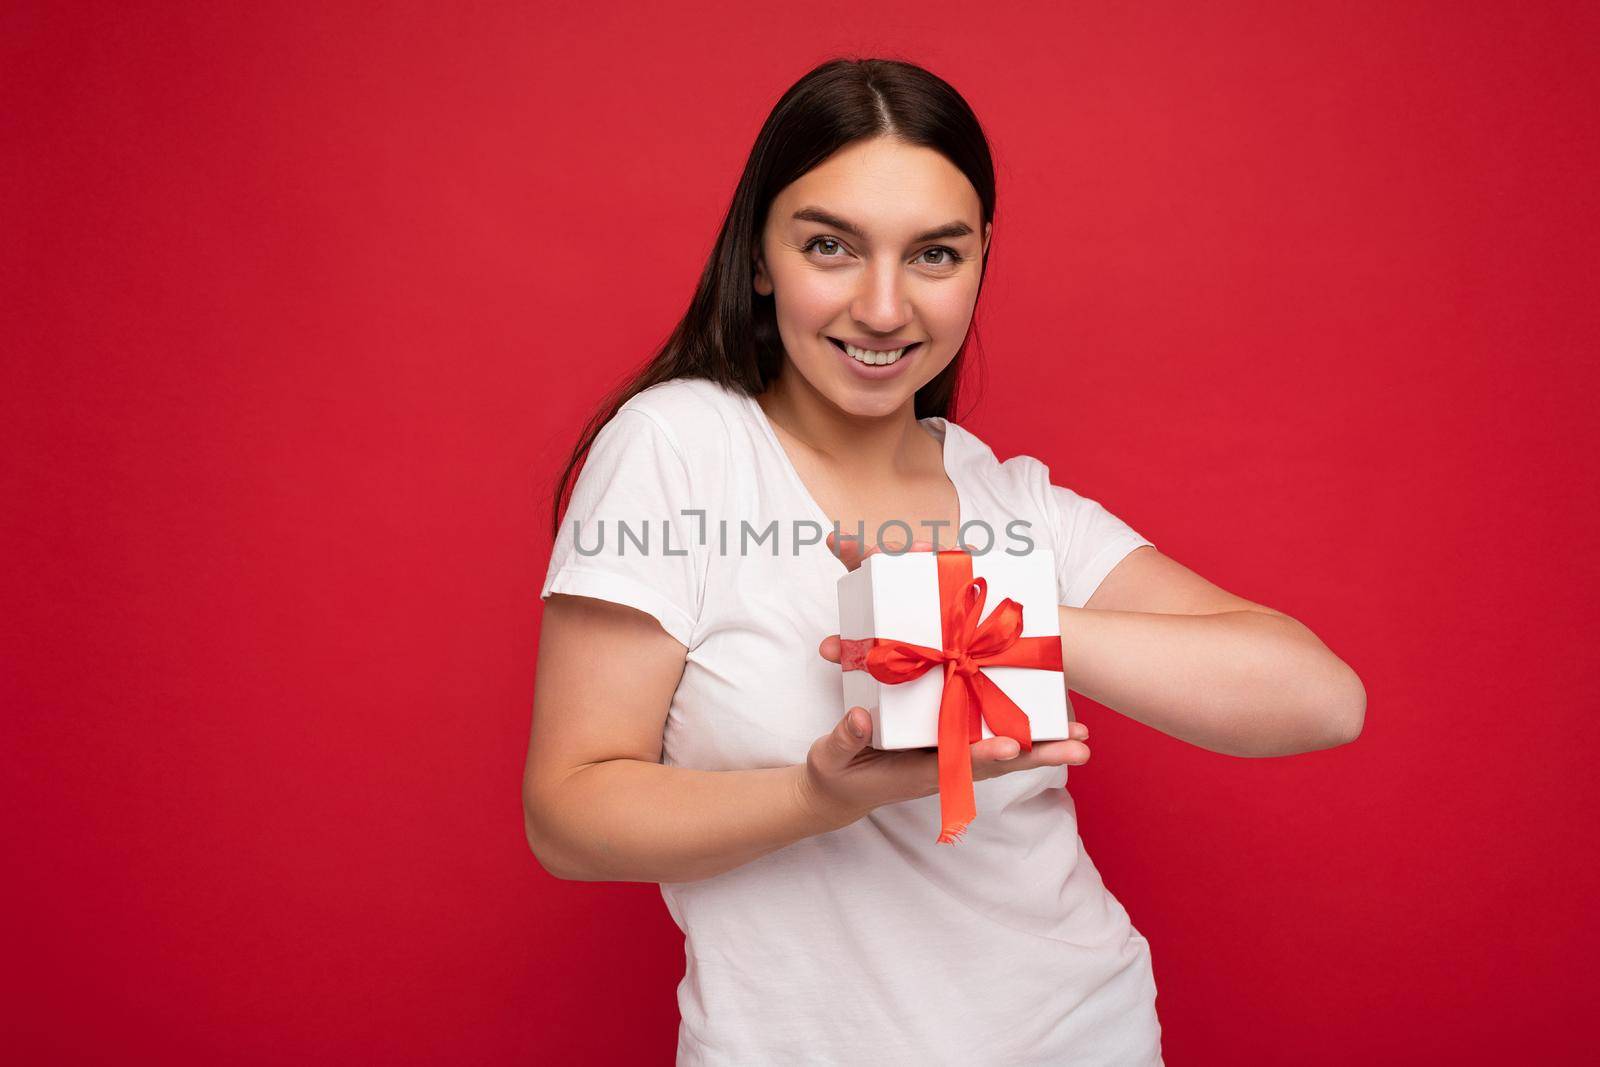 Shot of attractive positive smiling young brunette woman isolated over colourful background wall wearing everyday trendy outfit holding gift box and looking at camera.